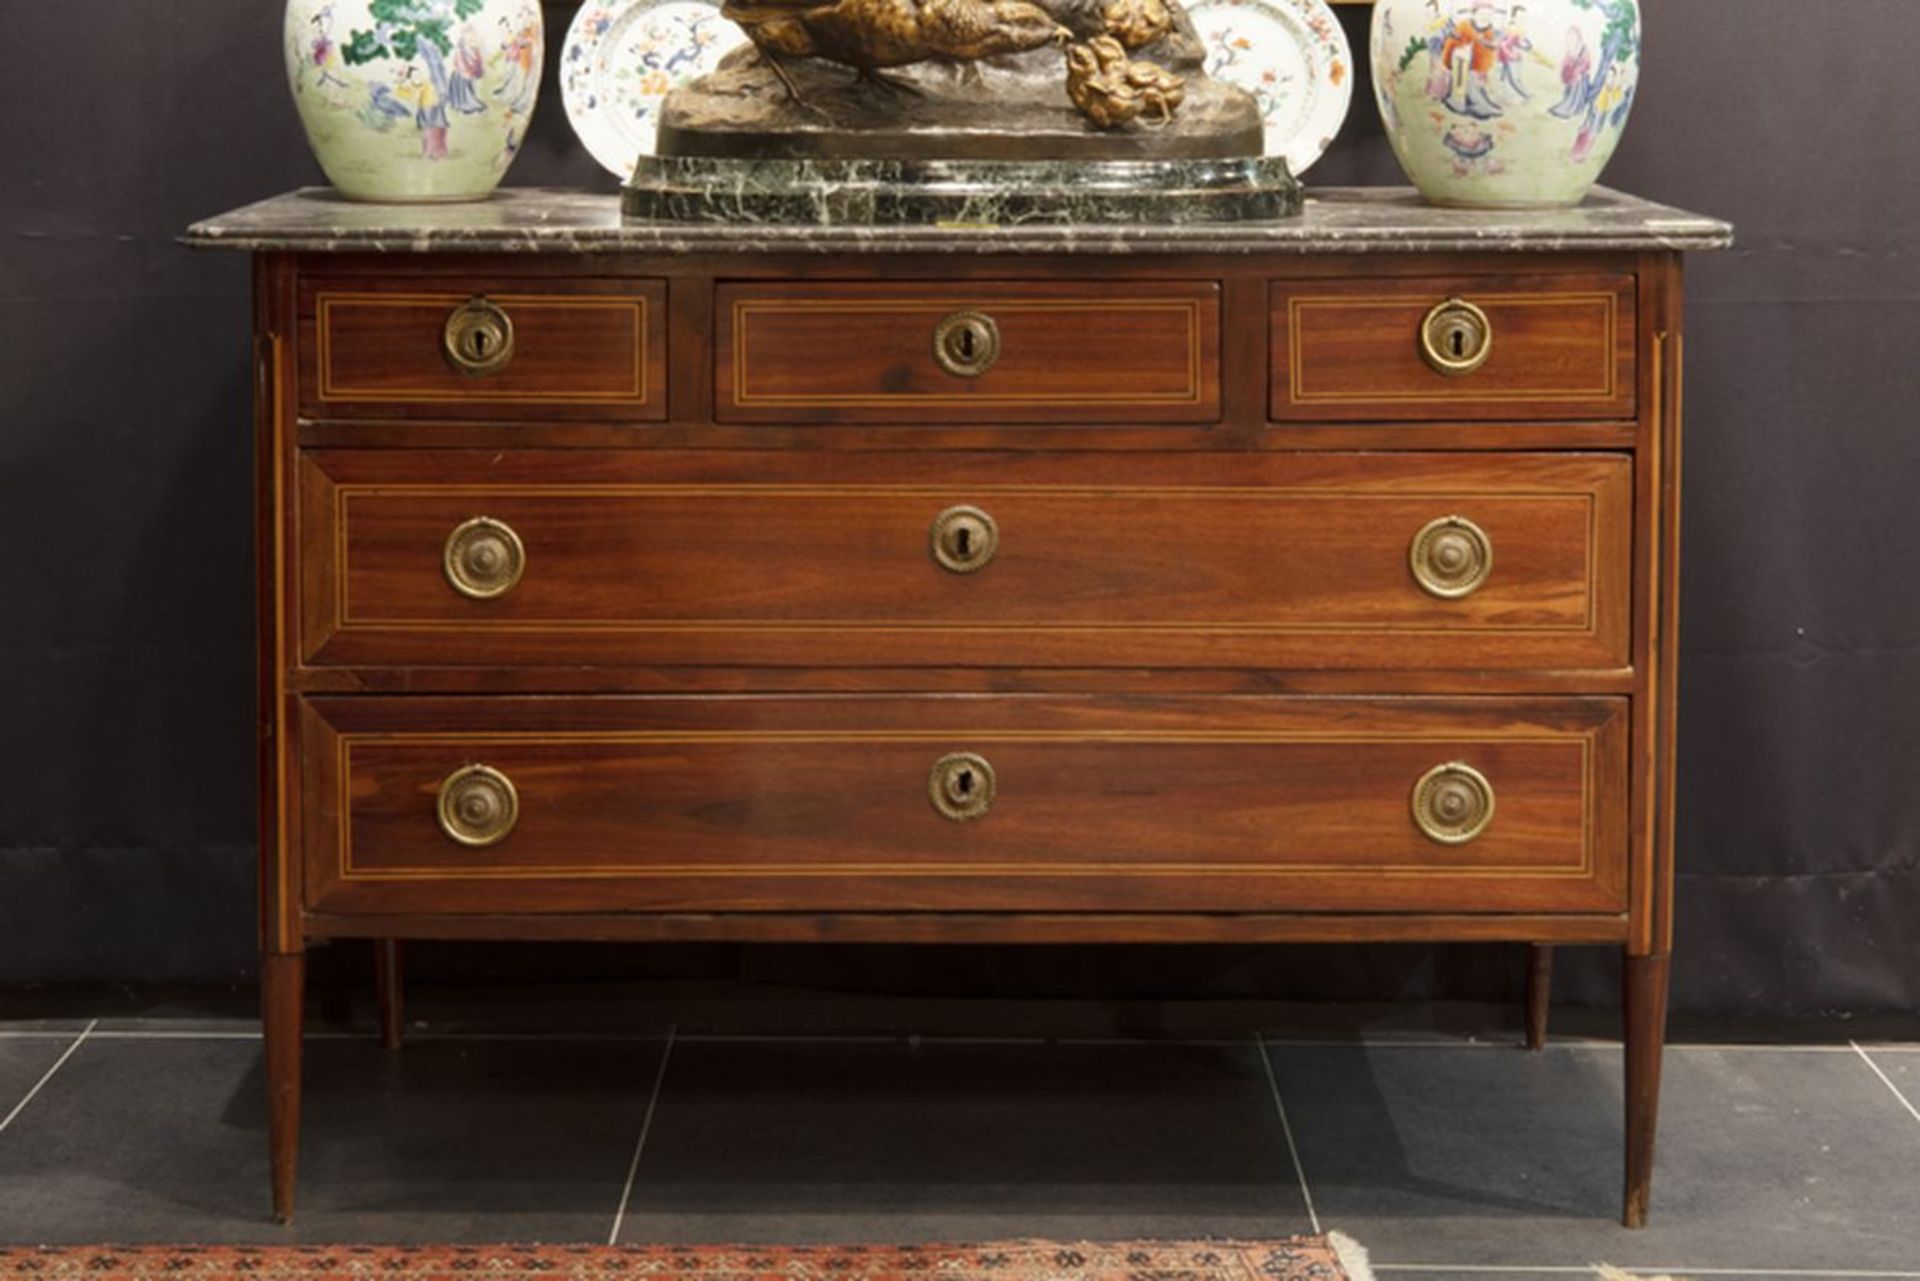 18th Cent. Louis XVI style chest of drawers mahogany with inlay - with five drawers [...]